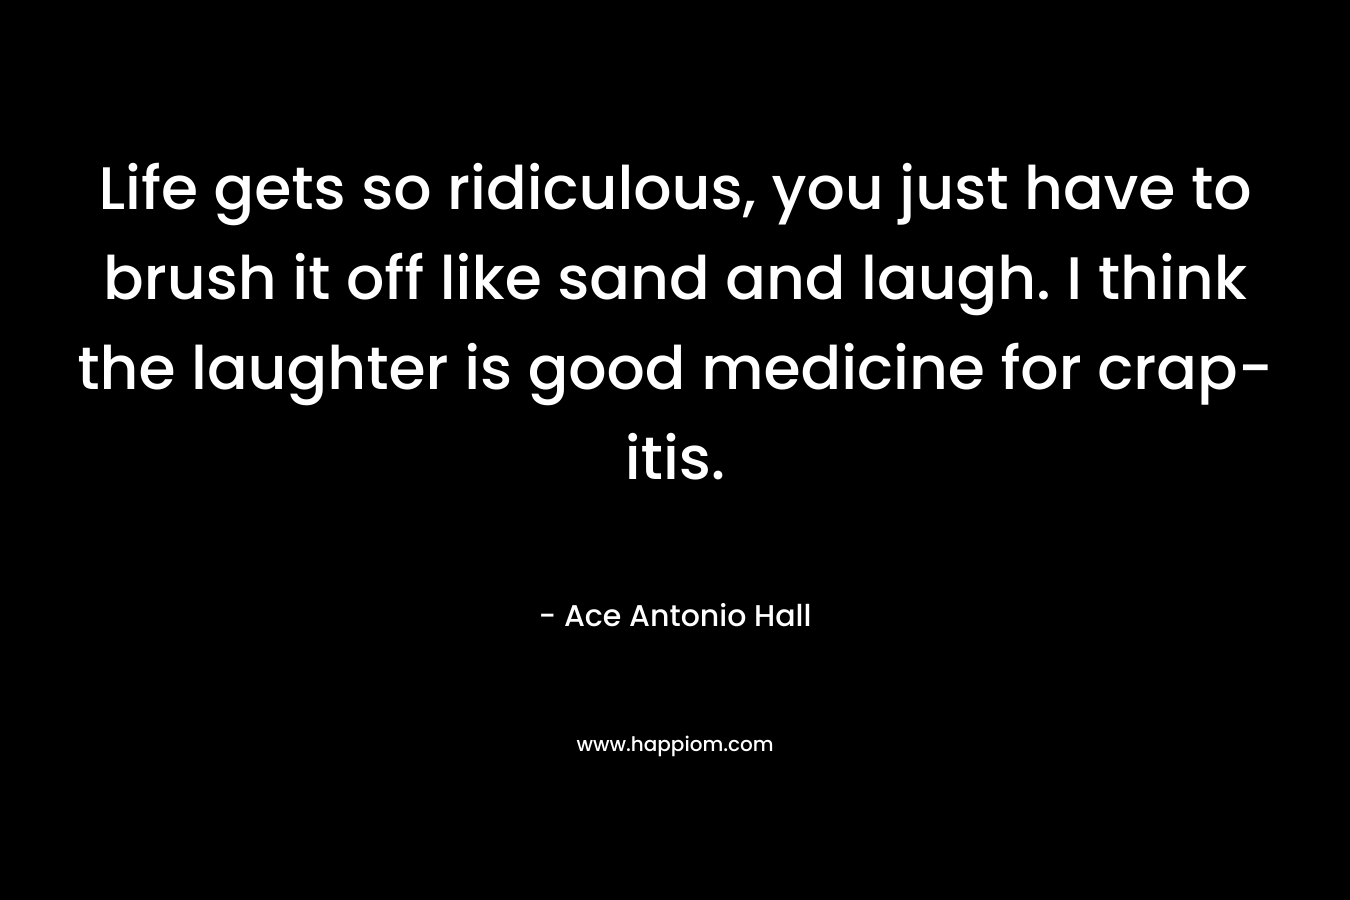 Life gets so ridiculous, you just have to brush it off like sand and laugh. I think the laughter is good medicine for crap-itis.